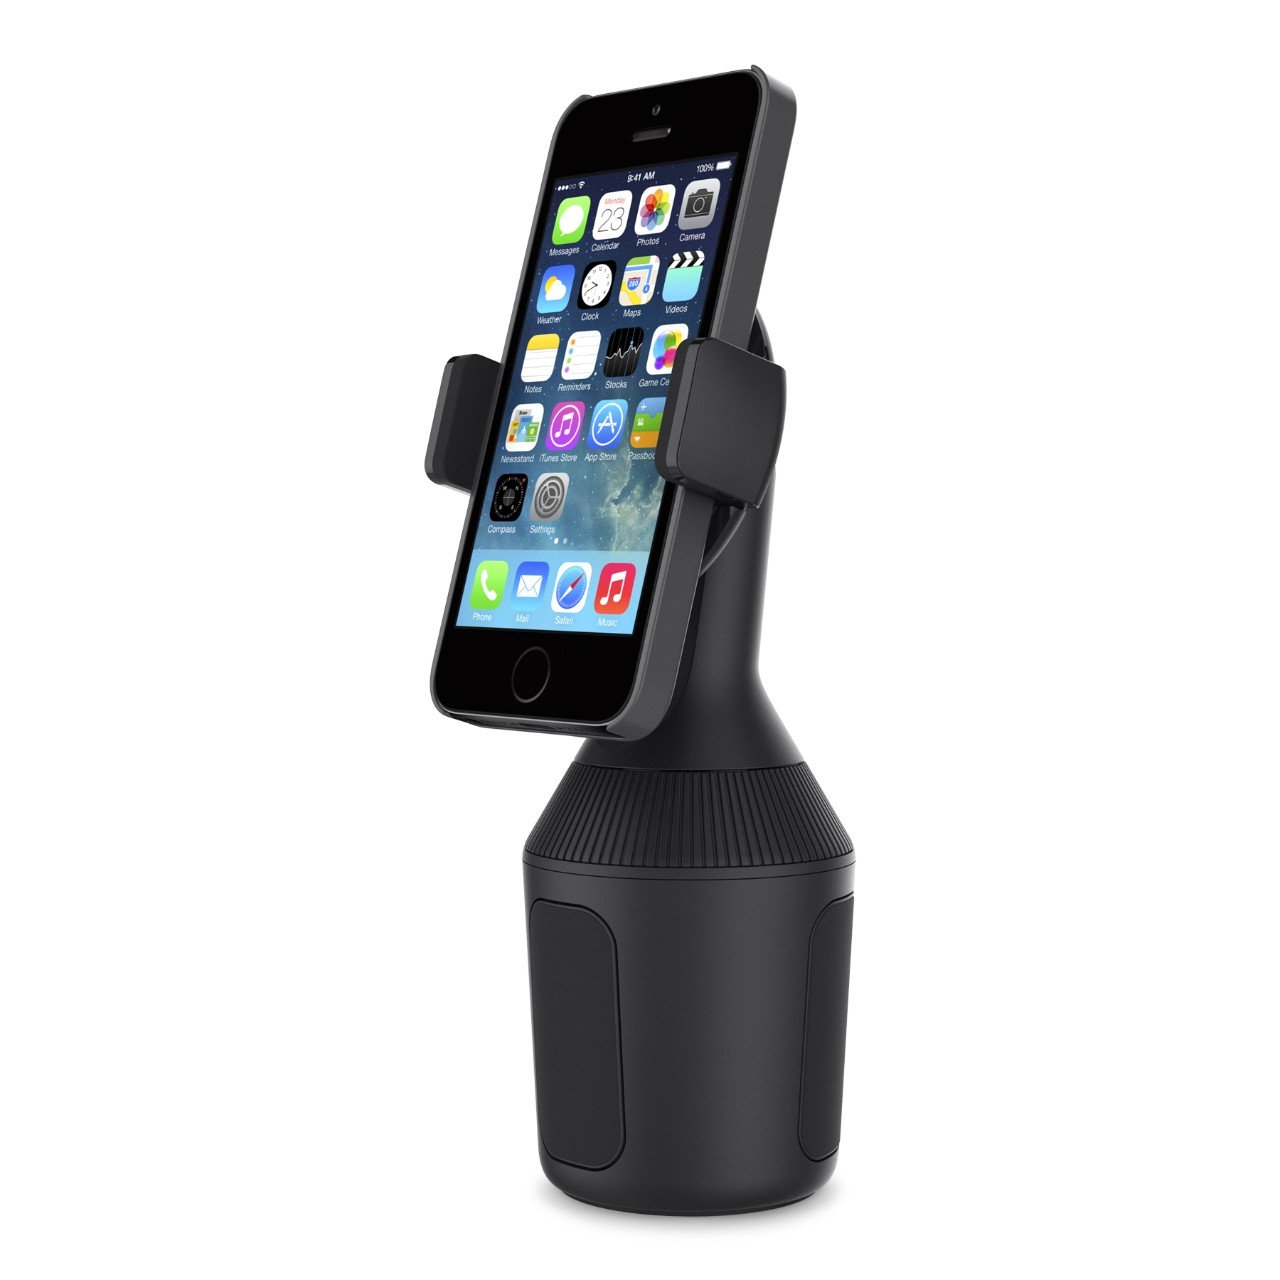 Belkin Car Cup Mount - Car Cup Mount For Phone - Phone Car Mount - Phone Stand - Phone Grip - Car Phone Holder Mount Compatible with iPhone, Samsung, Nokia, & Other Smartphones - Black